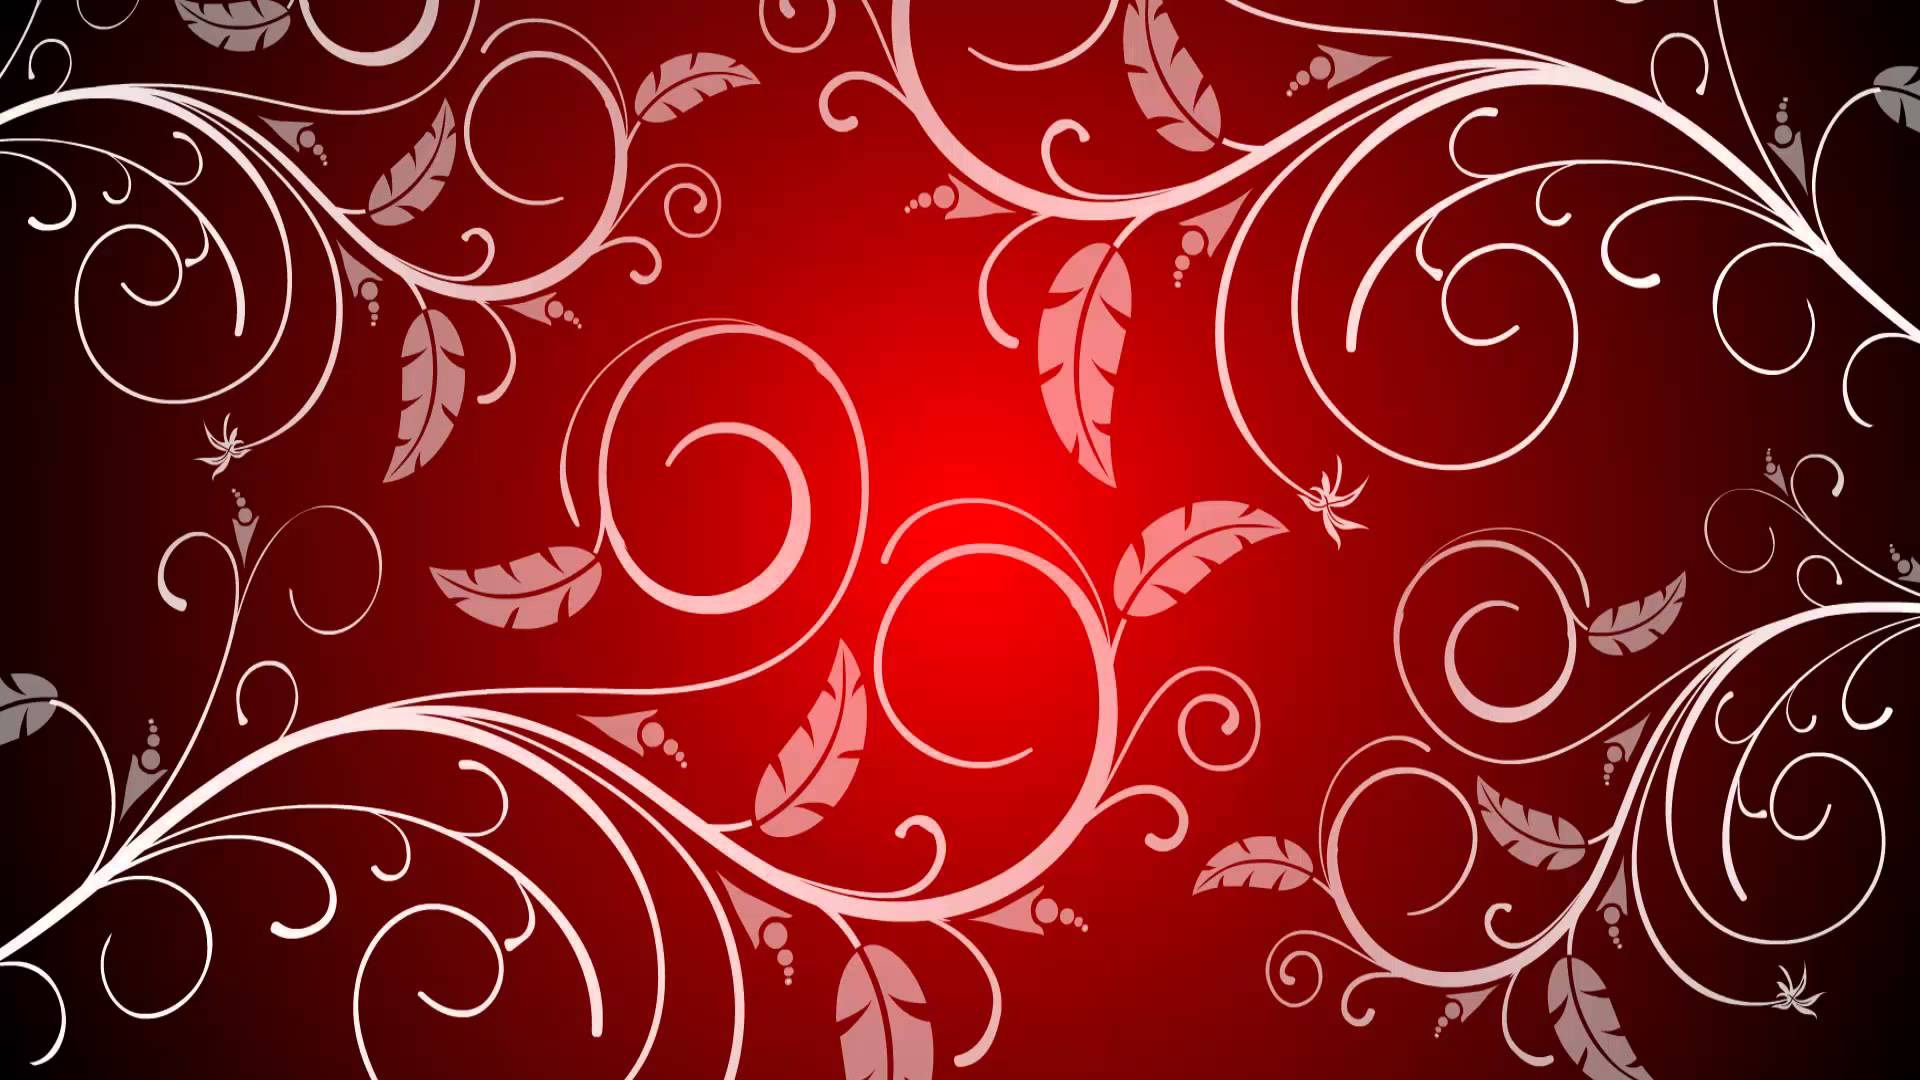 Animated Floral Background with Leaves